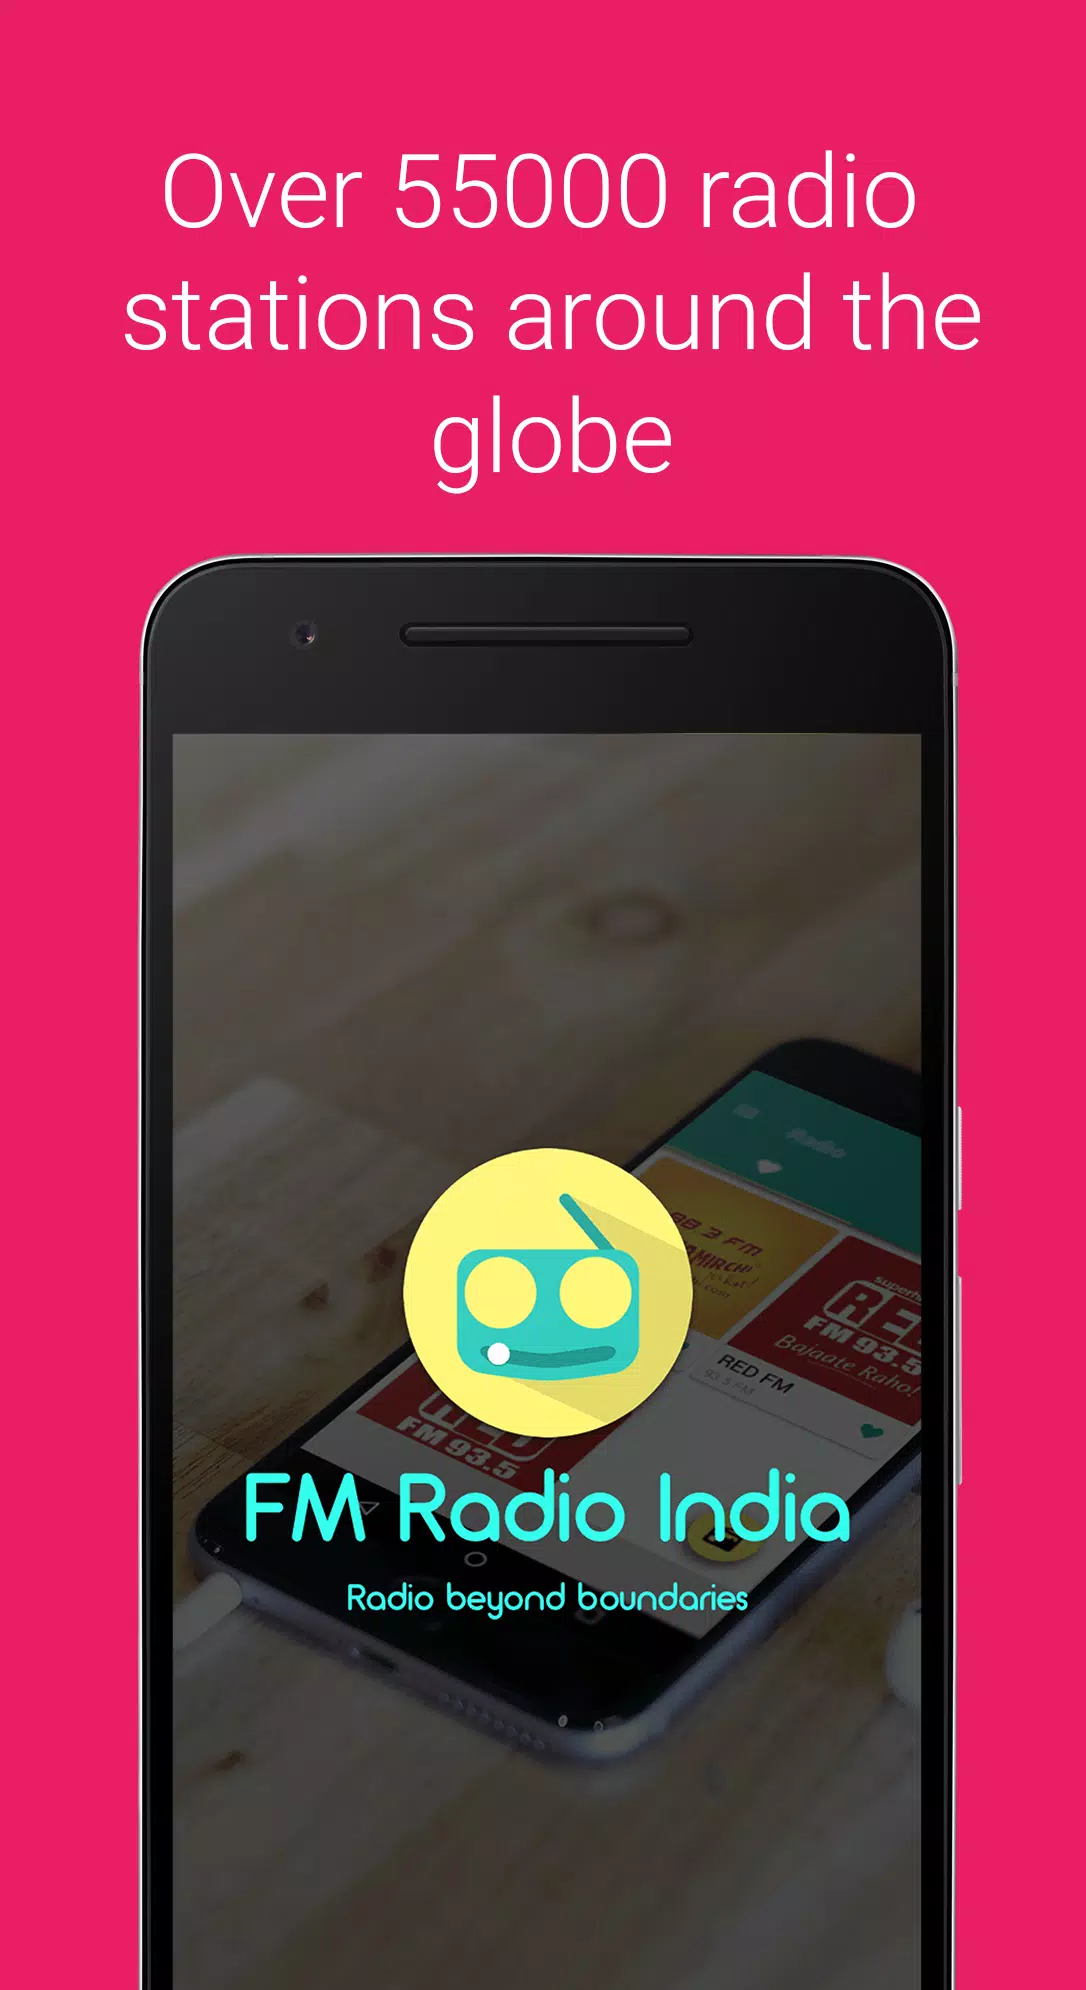 FM Radio India for Android - APK Download